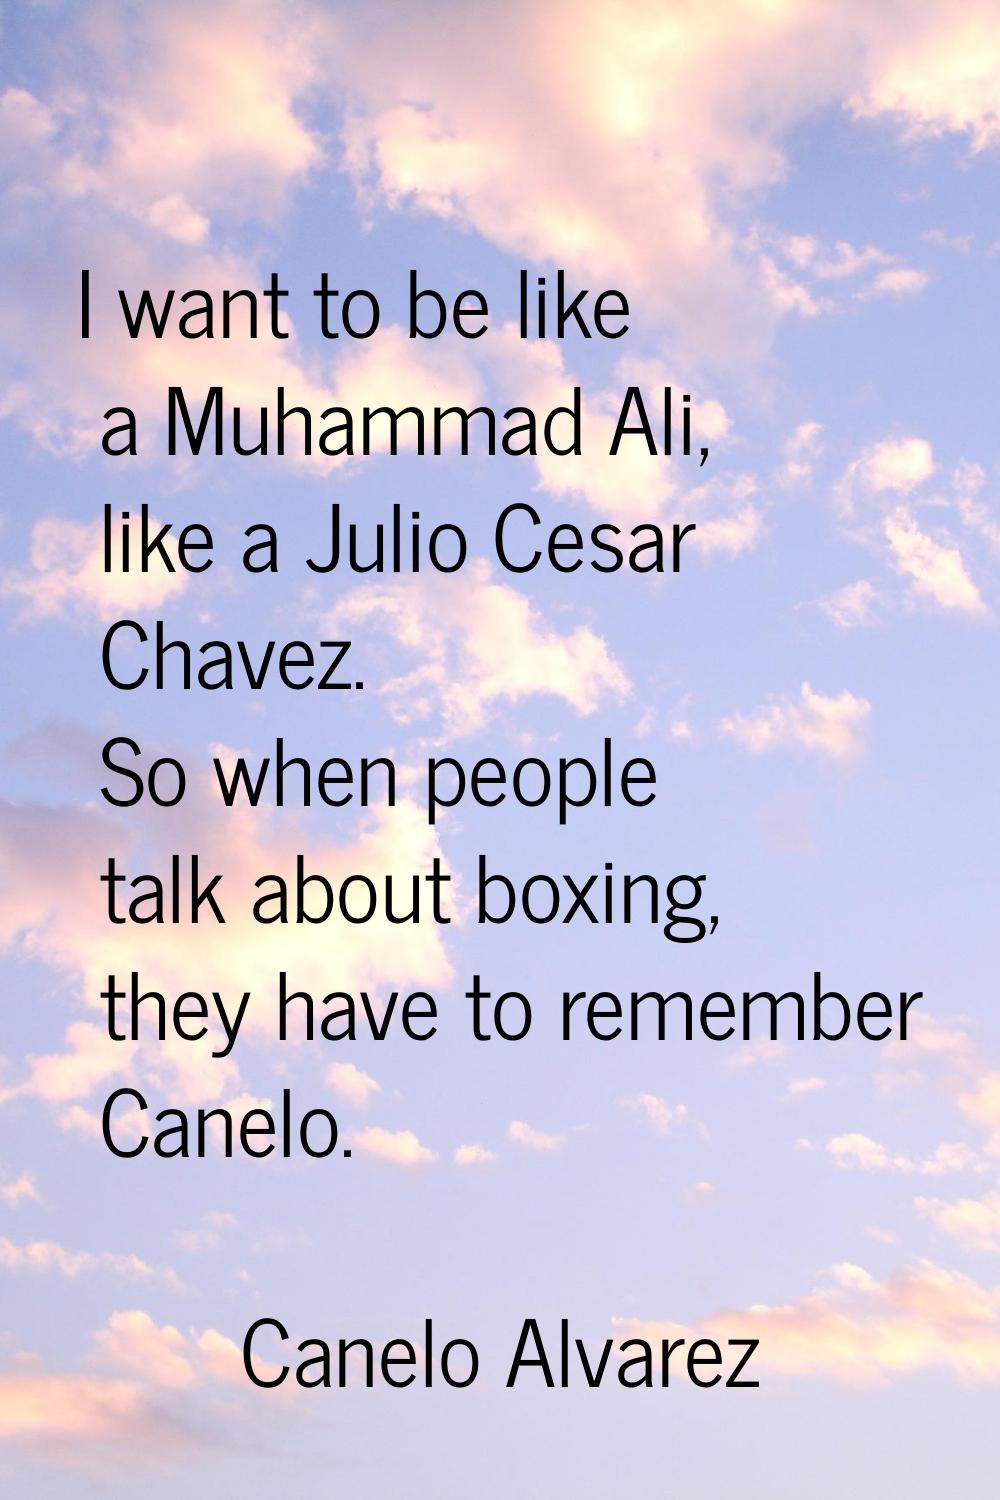 I want to be like a Muhammad Ali, like a Julio Cesar Chavez. So when people talk about boxing, they